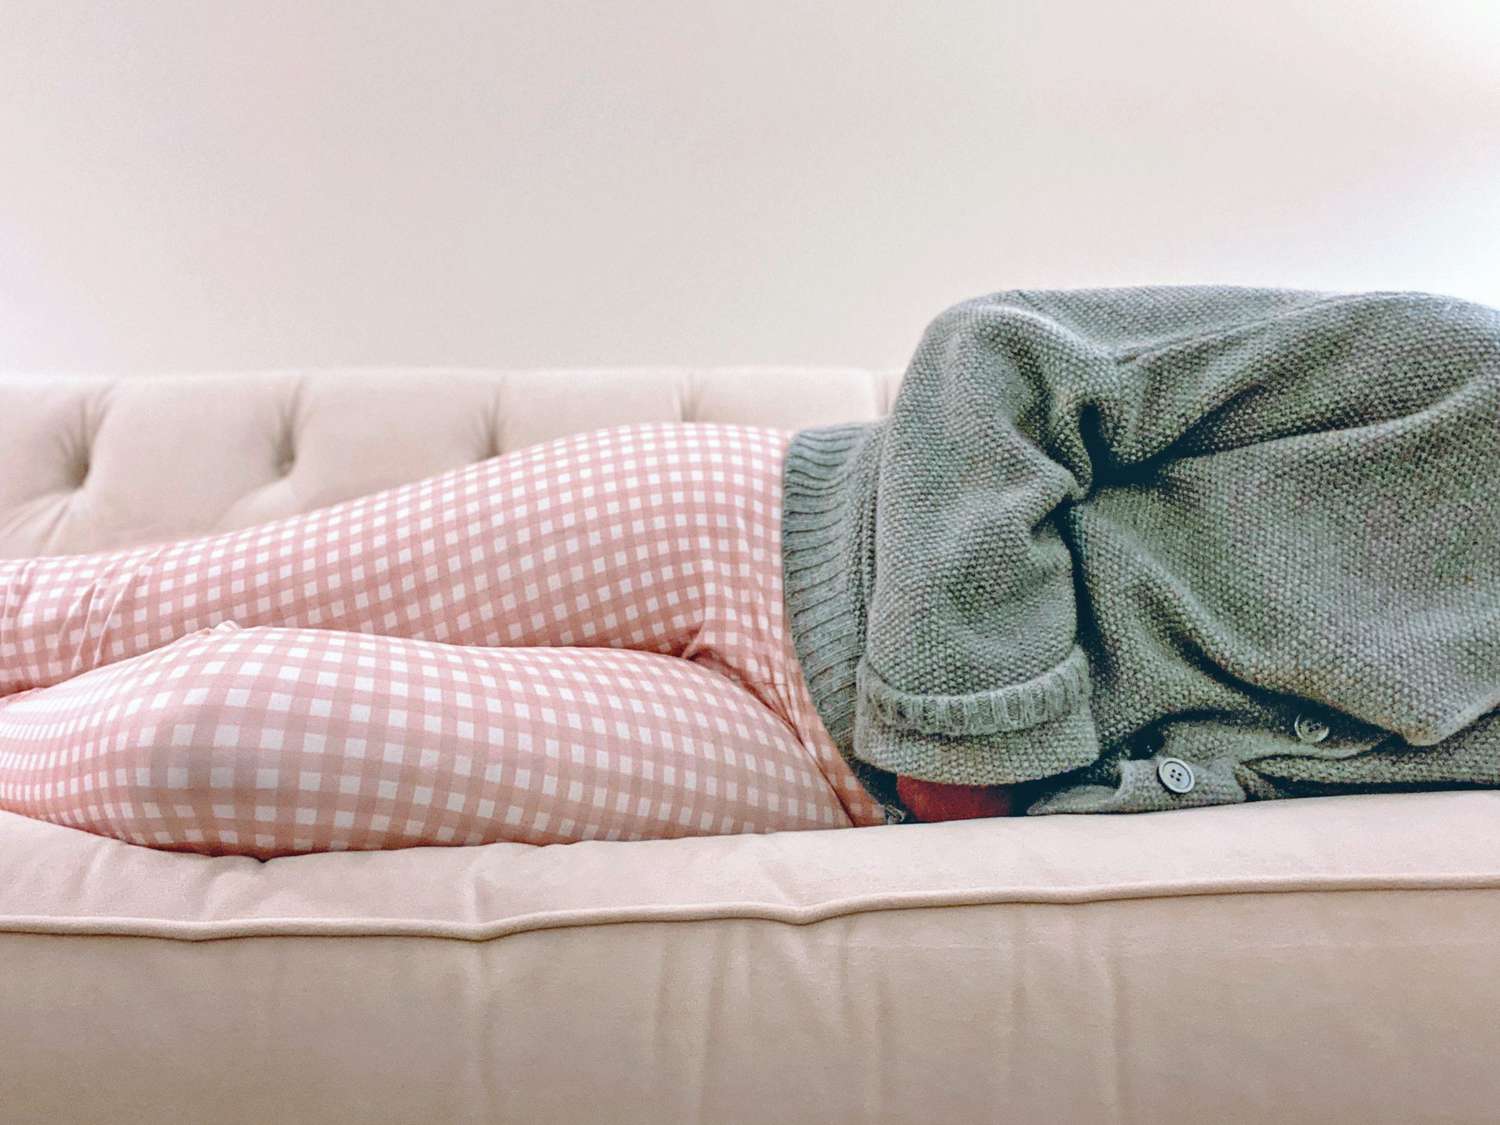 An image of a woman laying on a couch.